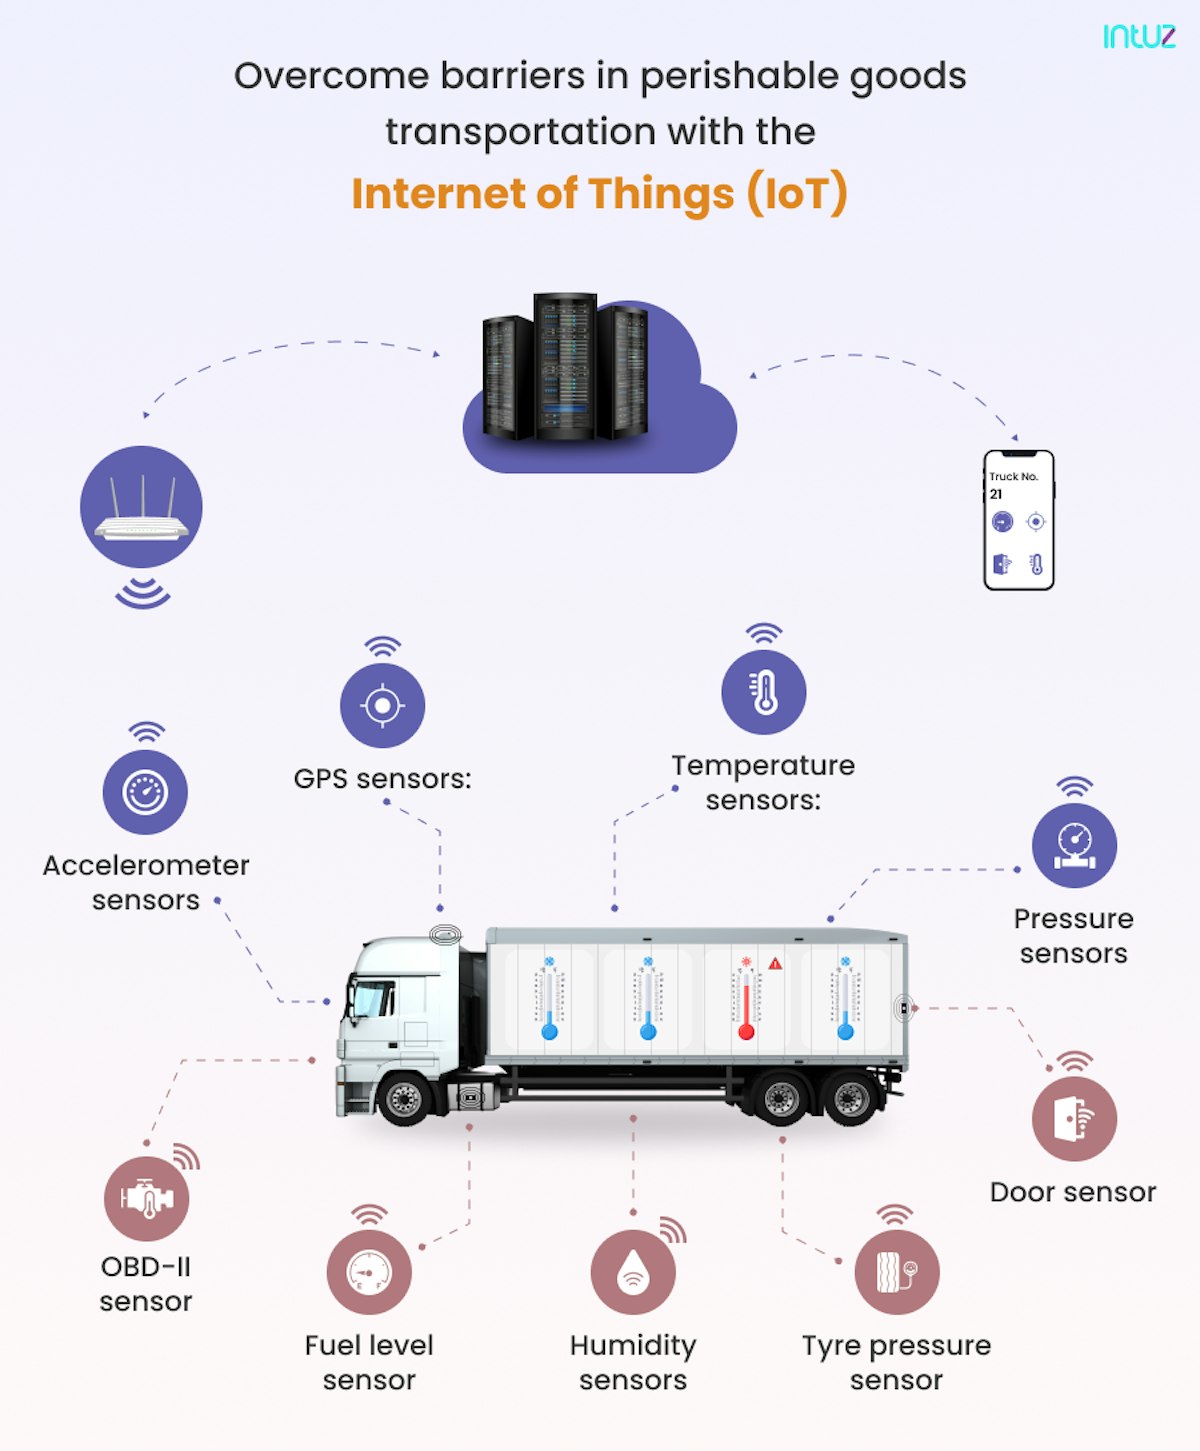 Perishable goods transportation with the Internet of Things (IoT)